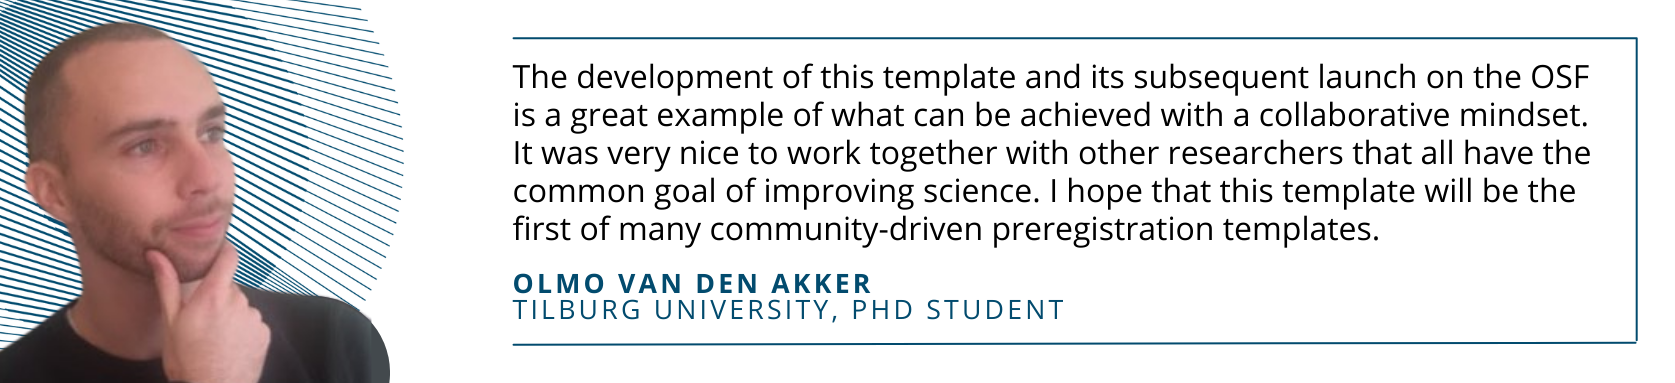 Photo of Olmo van den Akker with quote: The development of this template and its subsequent launch on the OSF is a great example of what can be achieved with a collaborative mindset. It was very nice to work together with other researchers that all have the common goal of improving science. I hope that this template will be the first of many community-driven preregistration templates.